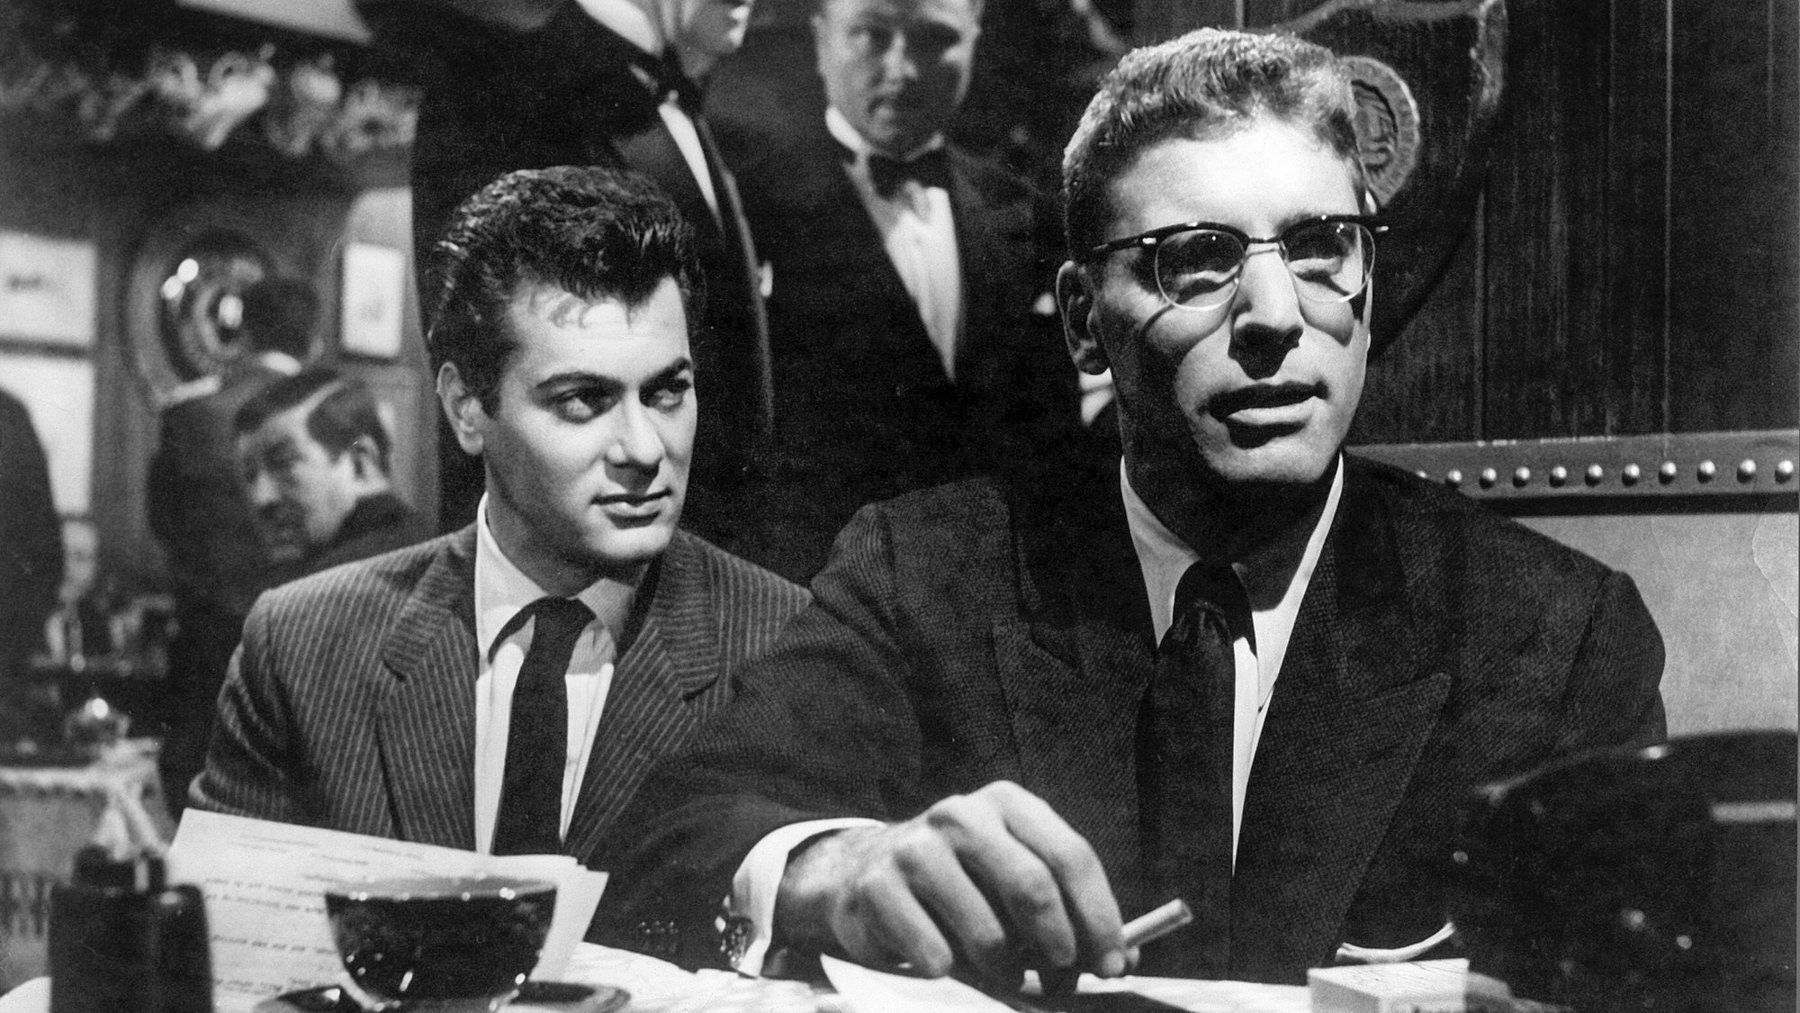 Tony Curtis and Burt Lancaster are sitting at a table having a coffee and cigarette and looking past us to someone out of the frame.